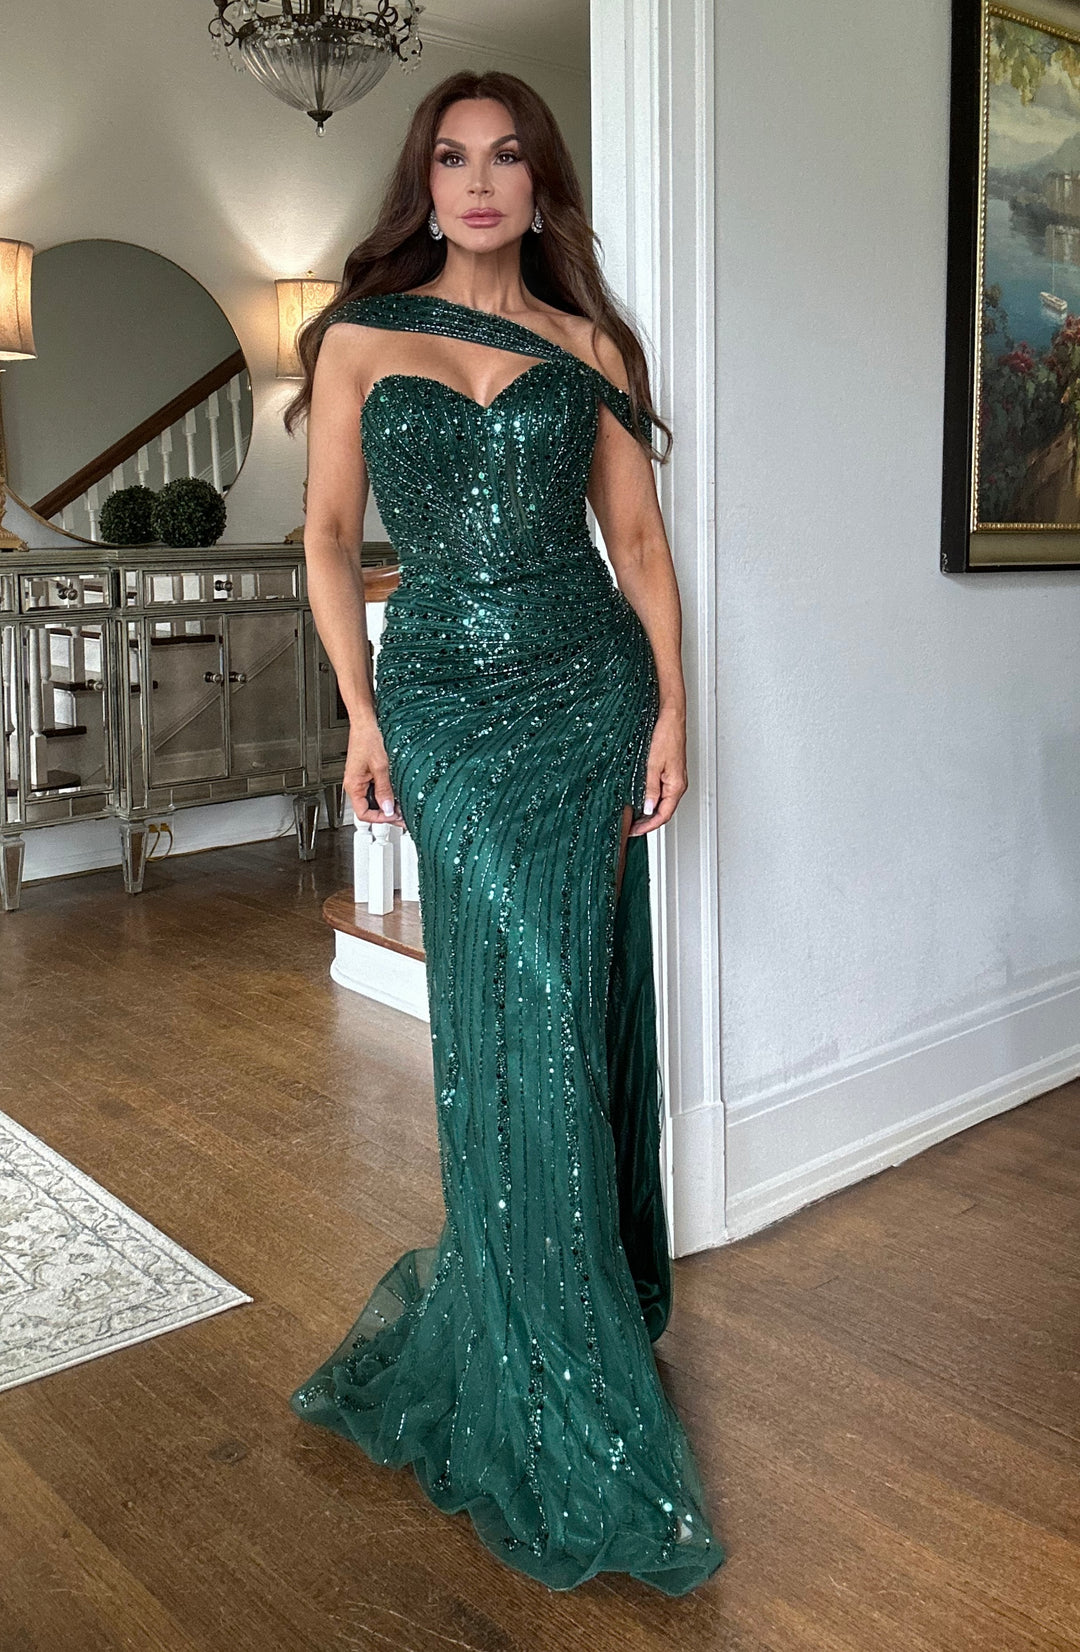 Polina Emerald Sequin Formal With Slit